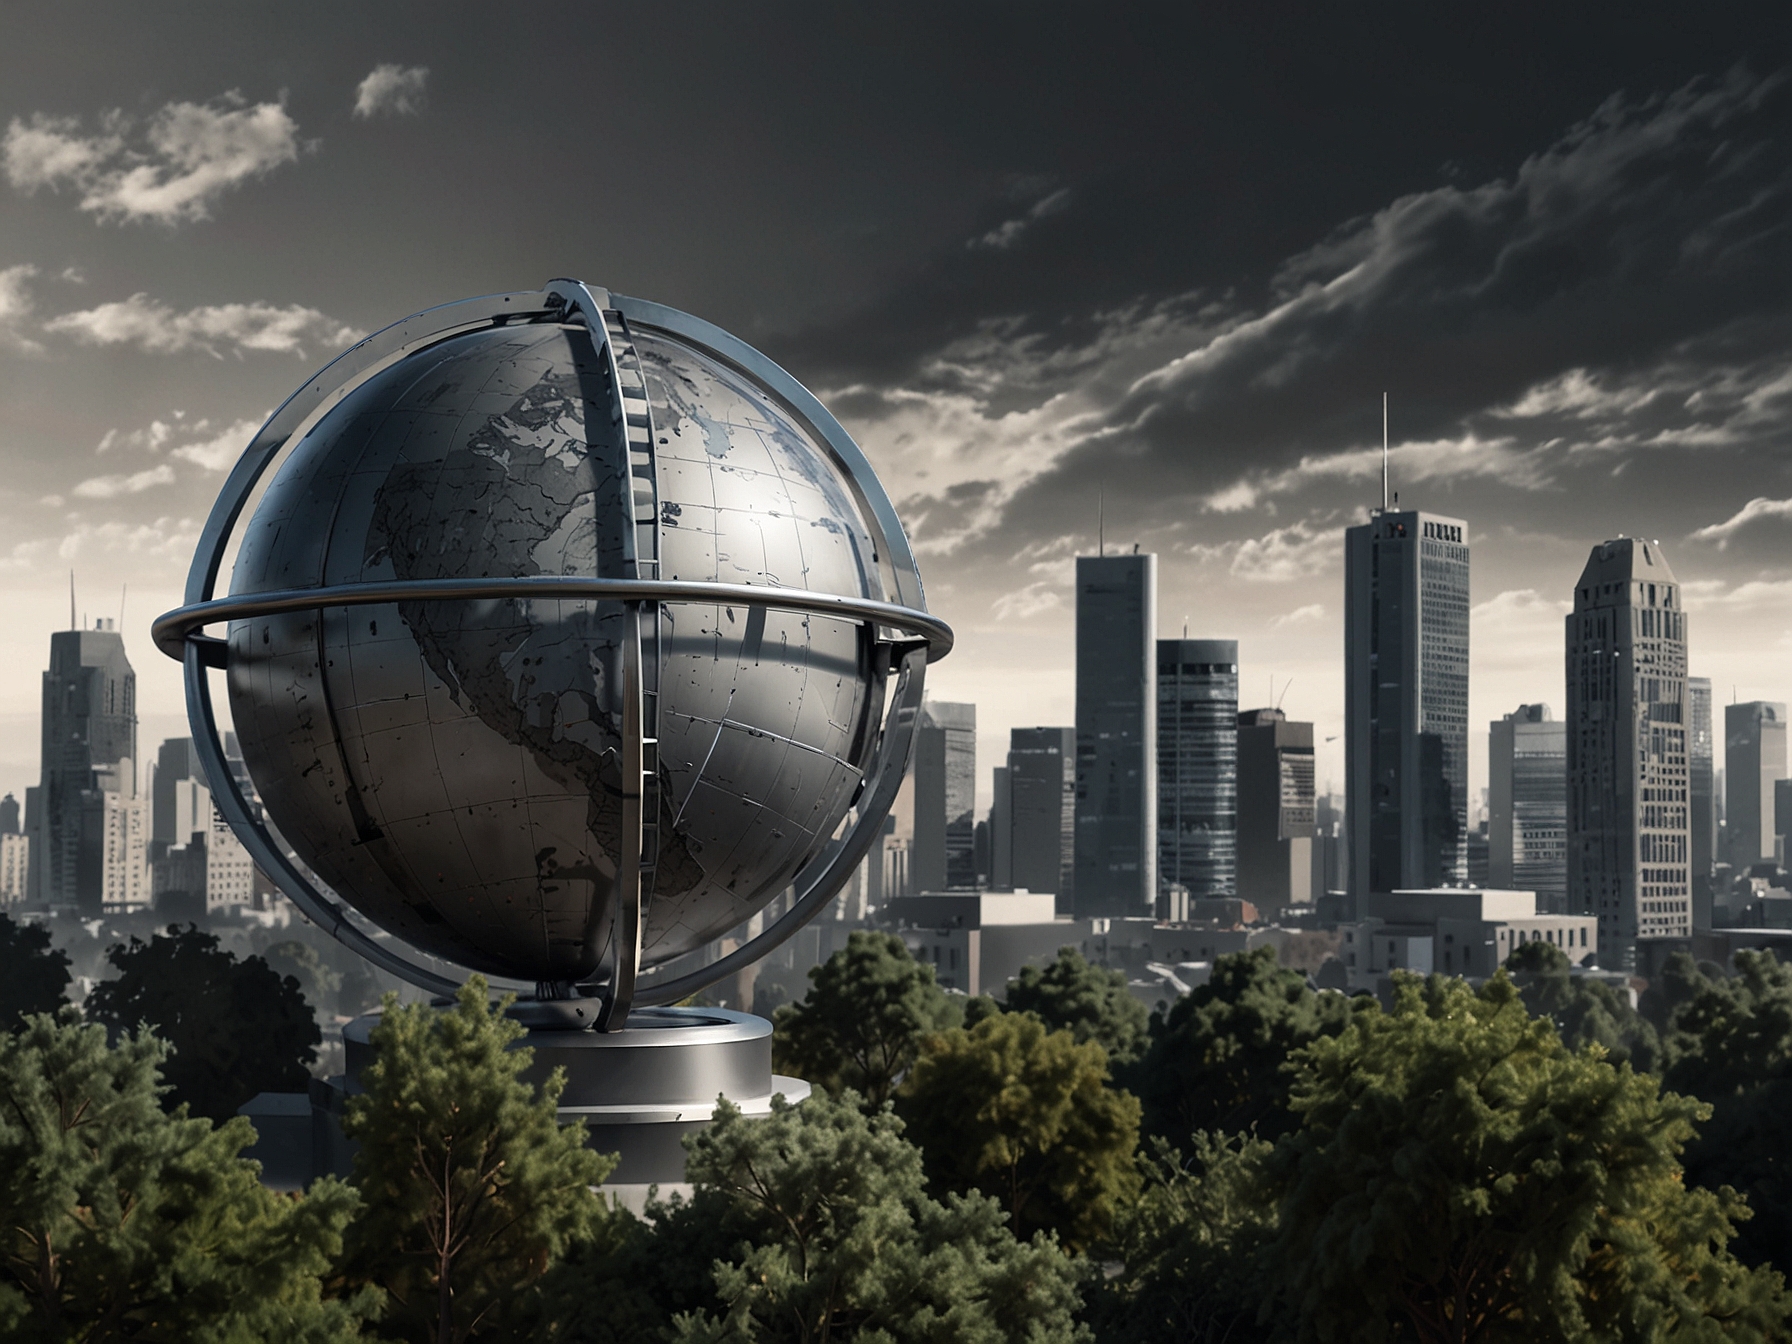 The Globe Model collects atmospheric data in diverse environments, offering a holistic view. Image shows the device measuring air in a dense urban landscape.